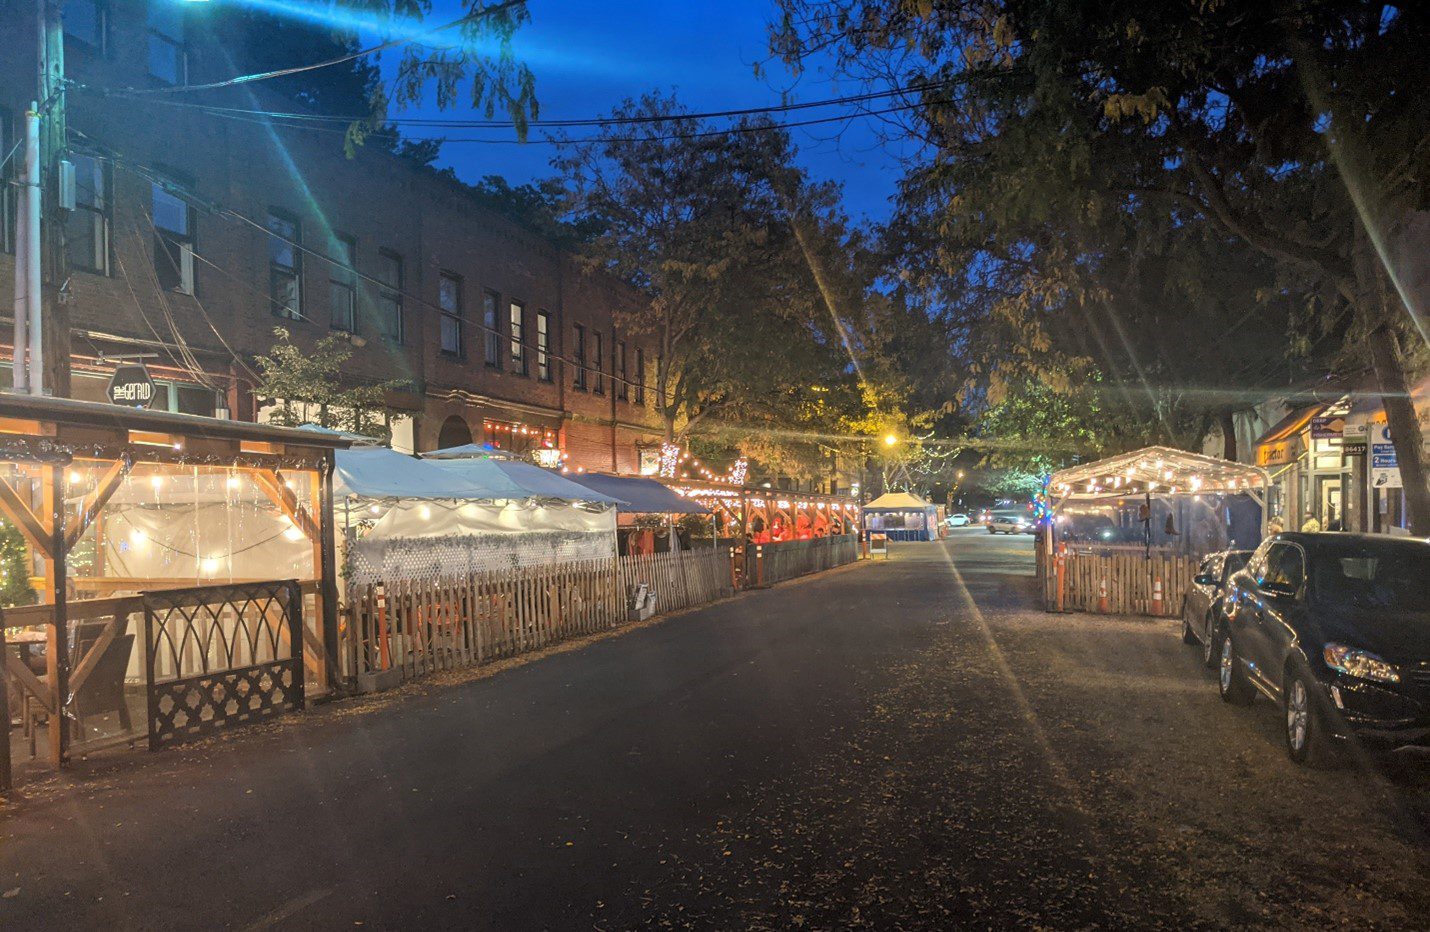 Several outdoor dining areas line the street on Ballard Ave NW in the evening. Large trees and buildings are visible in the background, along with parked cars on the right side.